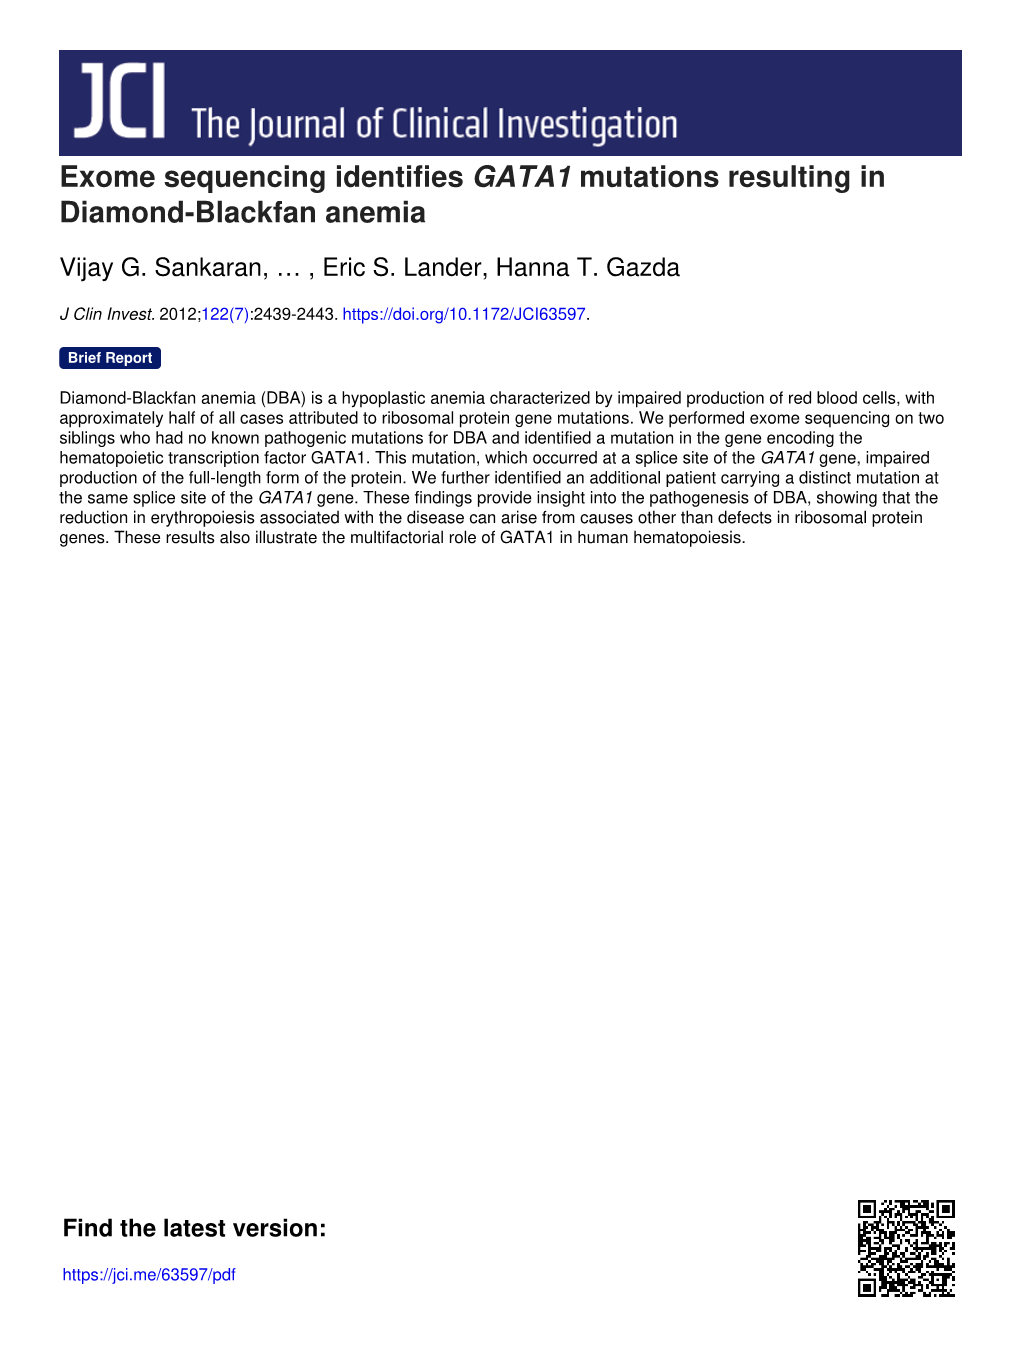 Exome Sequencing Identifies GATA1 Mutations Resulting in Diamond-Blackfan Anemia